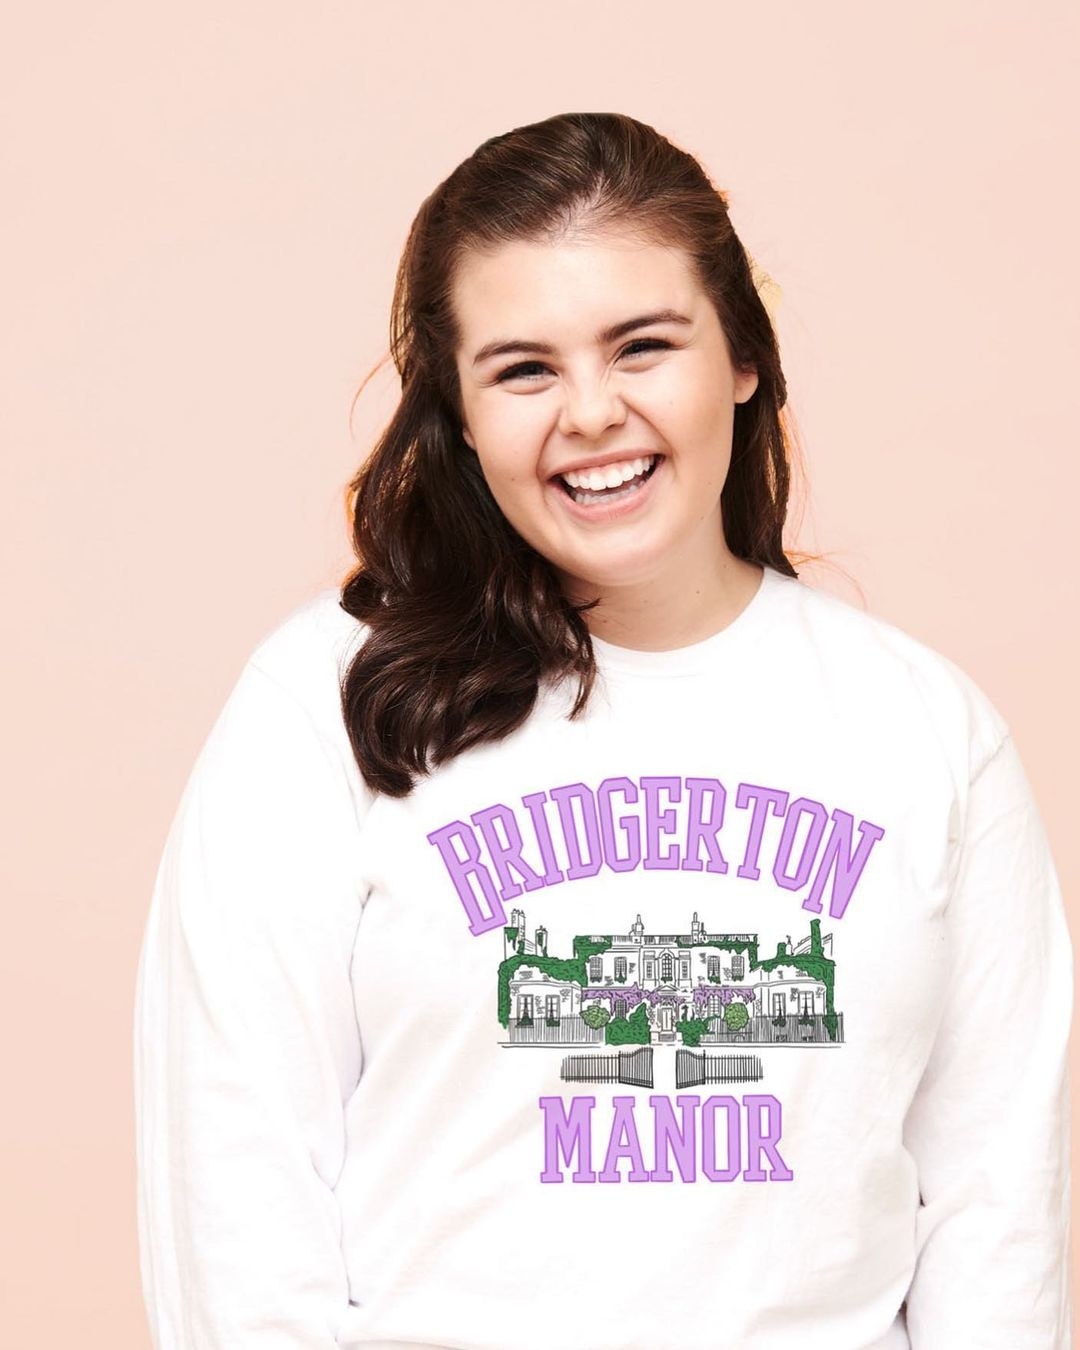 a model in a white long sleeve with an illustration of bridgerton manor on it